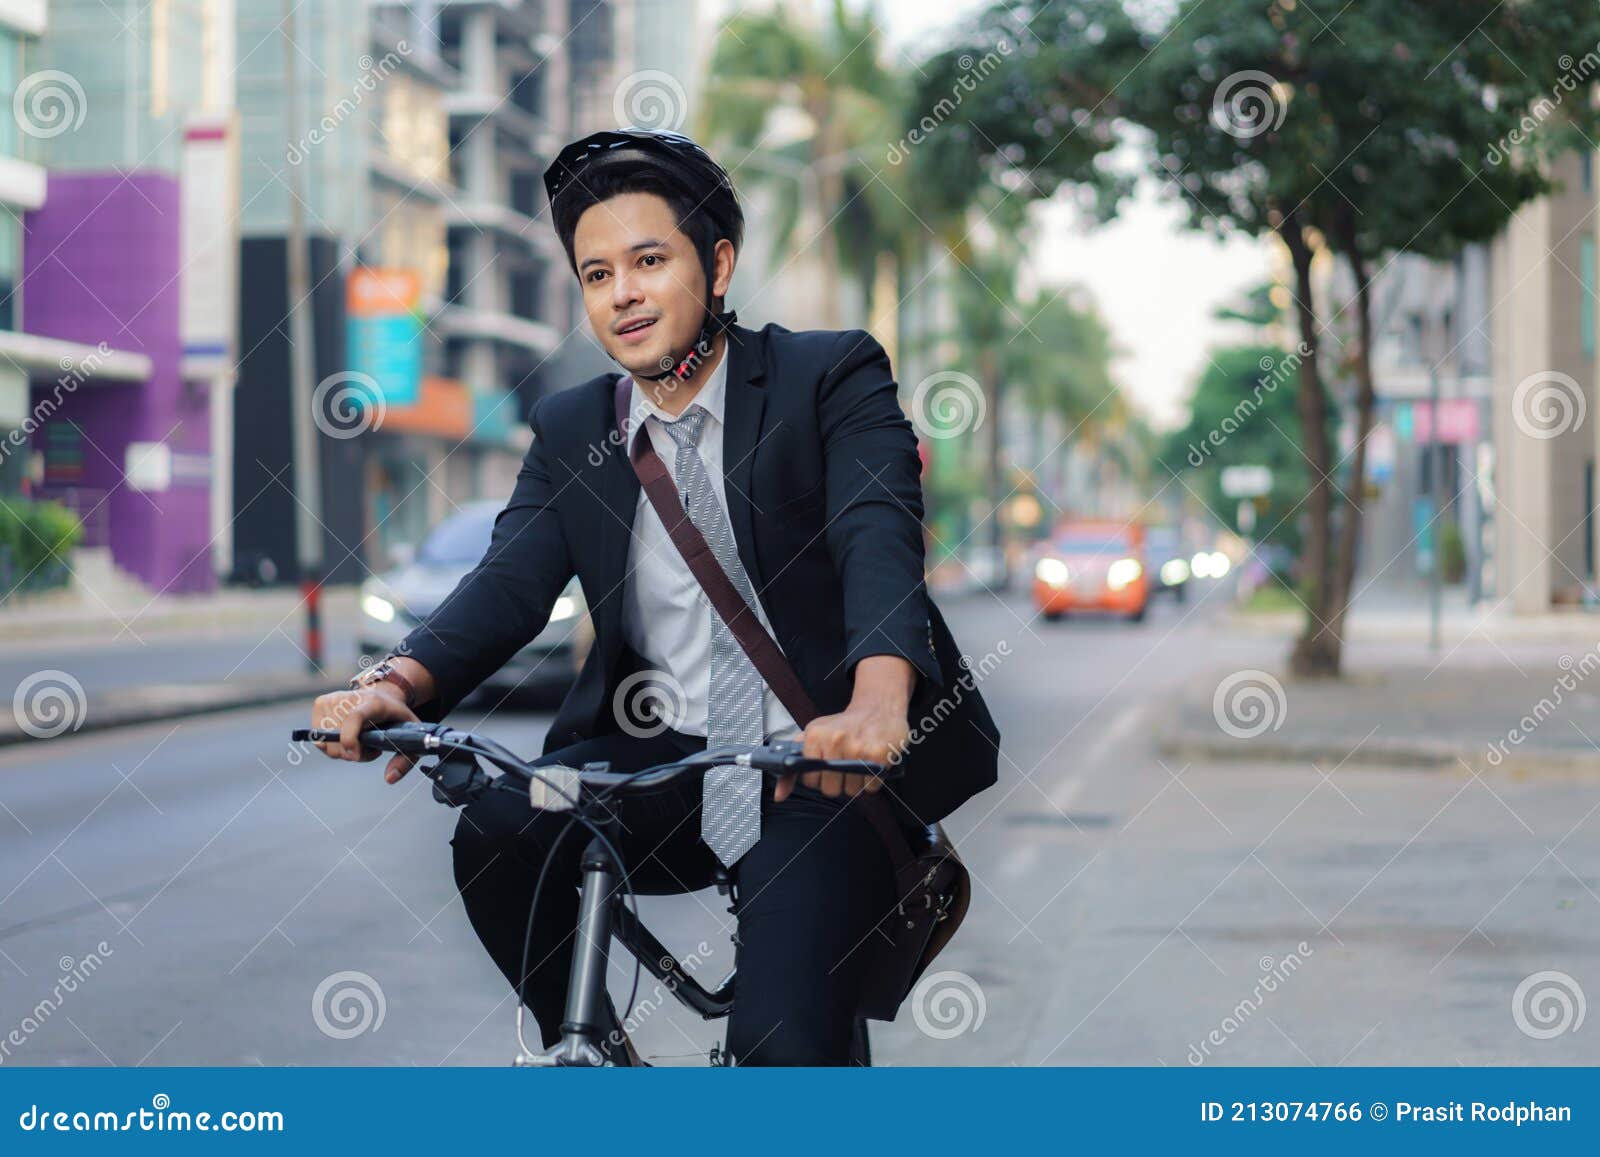 asian businessman in a suit is riding a bicycle on the city streets for his morning commute to work. eco transportation concept